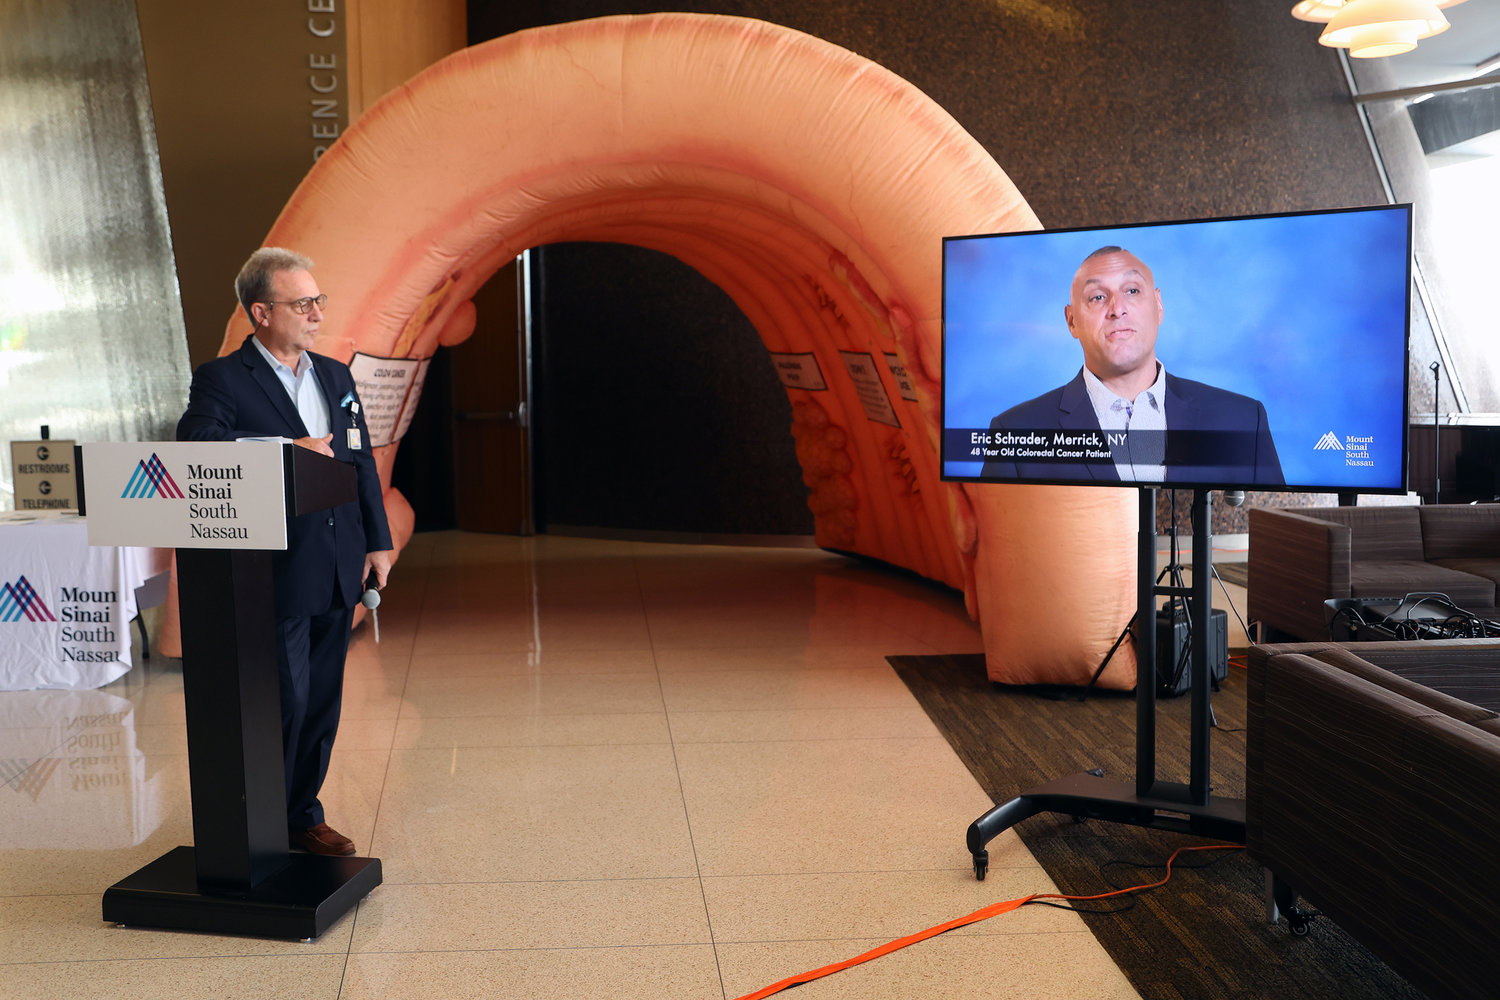 Joe Calderone plays a video of Eric Schrader of Merrick, a 48-year old colorectal cancer patient who told his story of colon cancer virtually at Mount Sinai South Nassau on March 6.